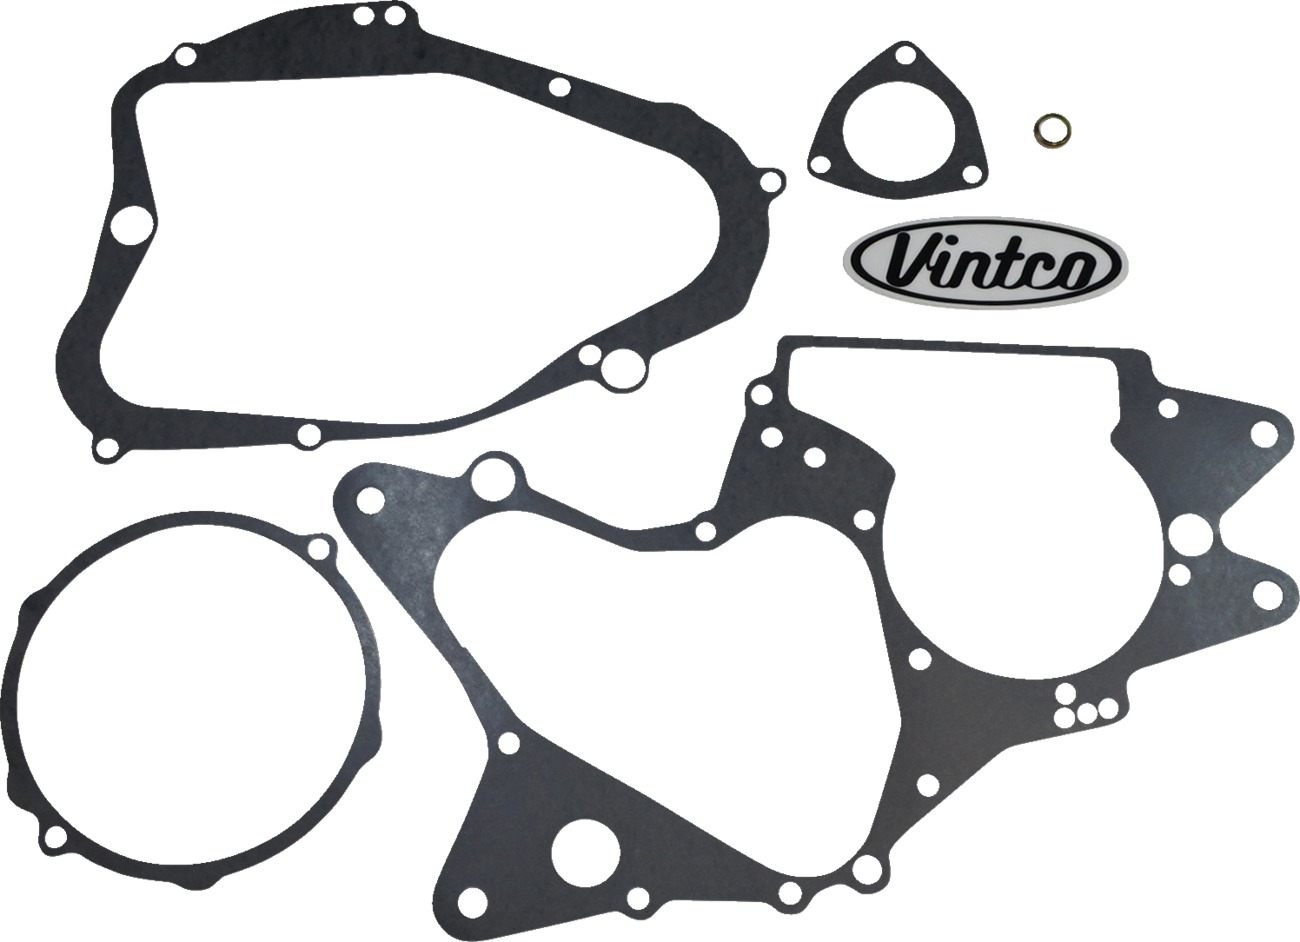 Lower Engine Gasket Kit - For 1977 Suzuki RM100 76-78 RM125 - Click Image to Close